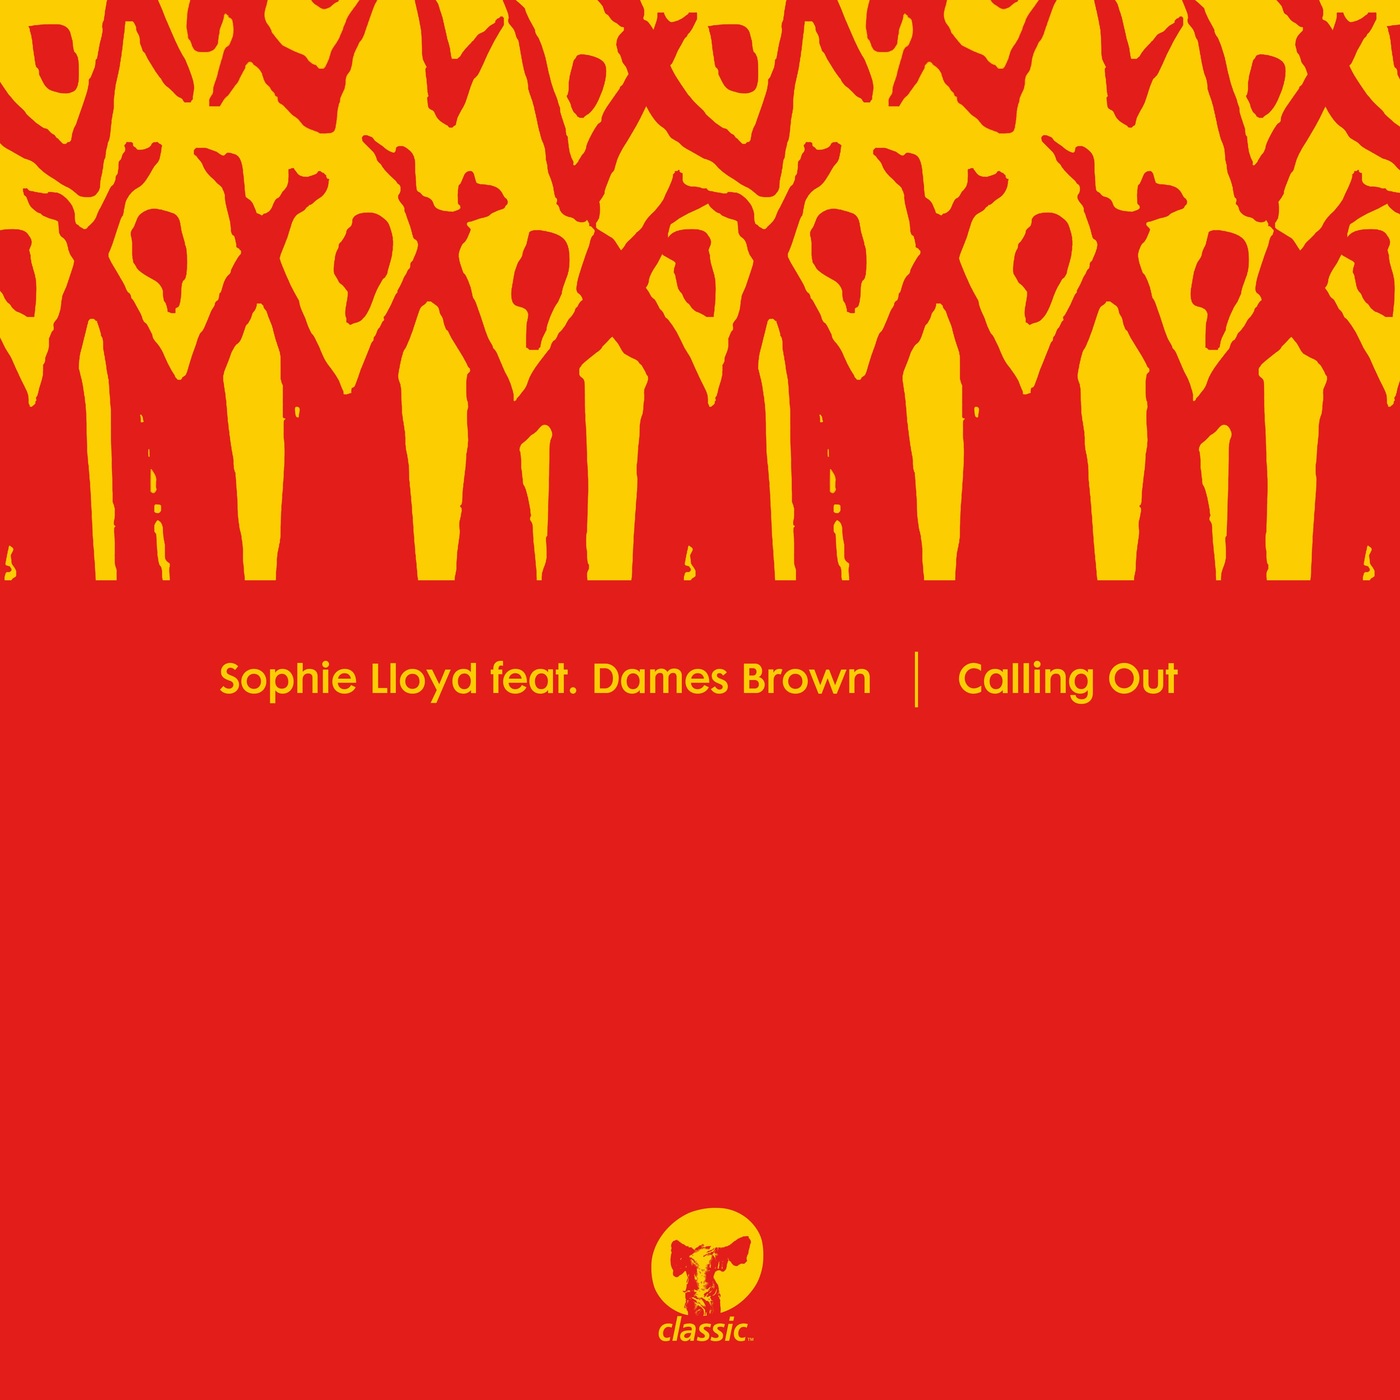 Sophie Lloyd - Calling Out (feat. Dames Brown) (12" Mix) / Classic Music Company